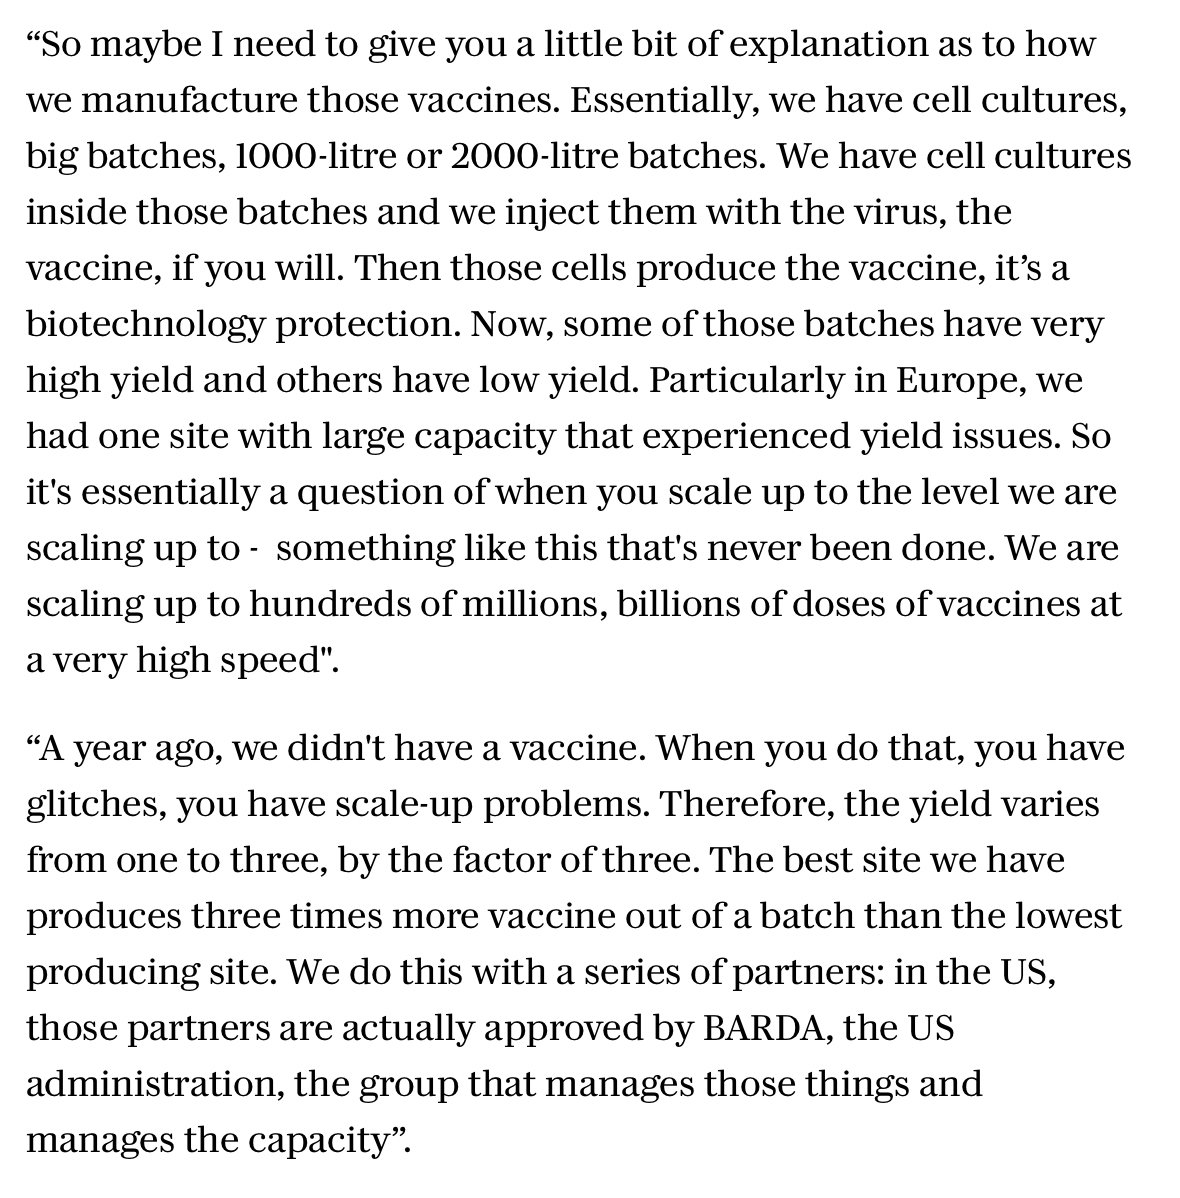 it's a whole subfield of biotech. maintaining this balance is a fiddly nuisance. Here's the boss of  @AstraZeneca saying so